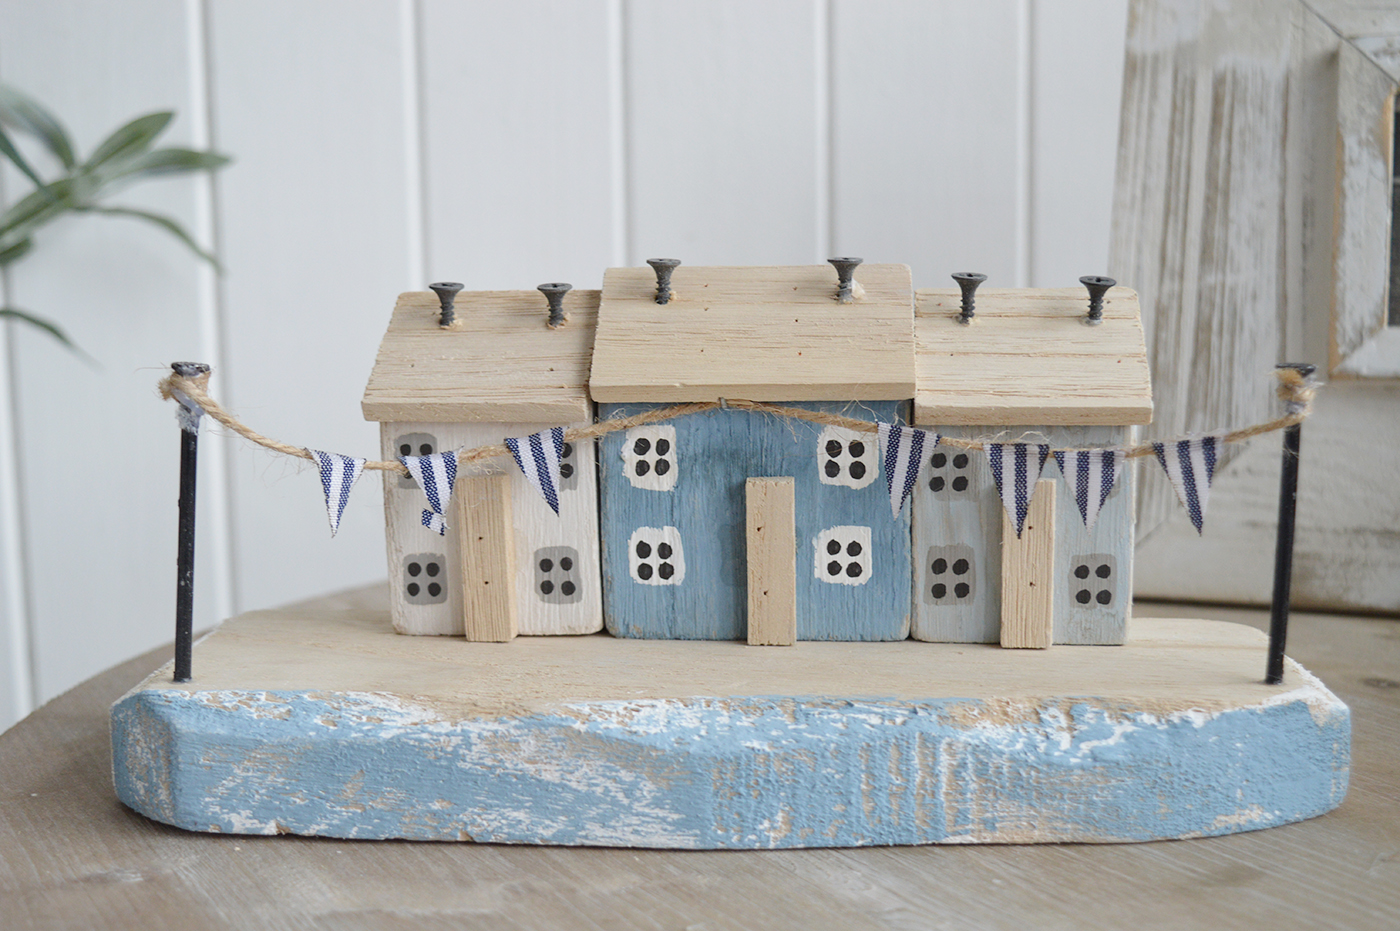 Driftwood Wooden houses - New England Coastal and Beach House Style Home Decor - 3 houses